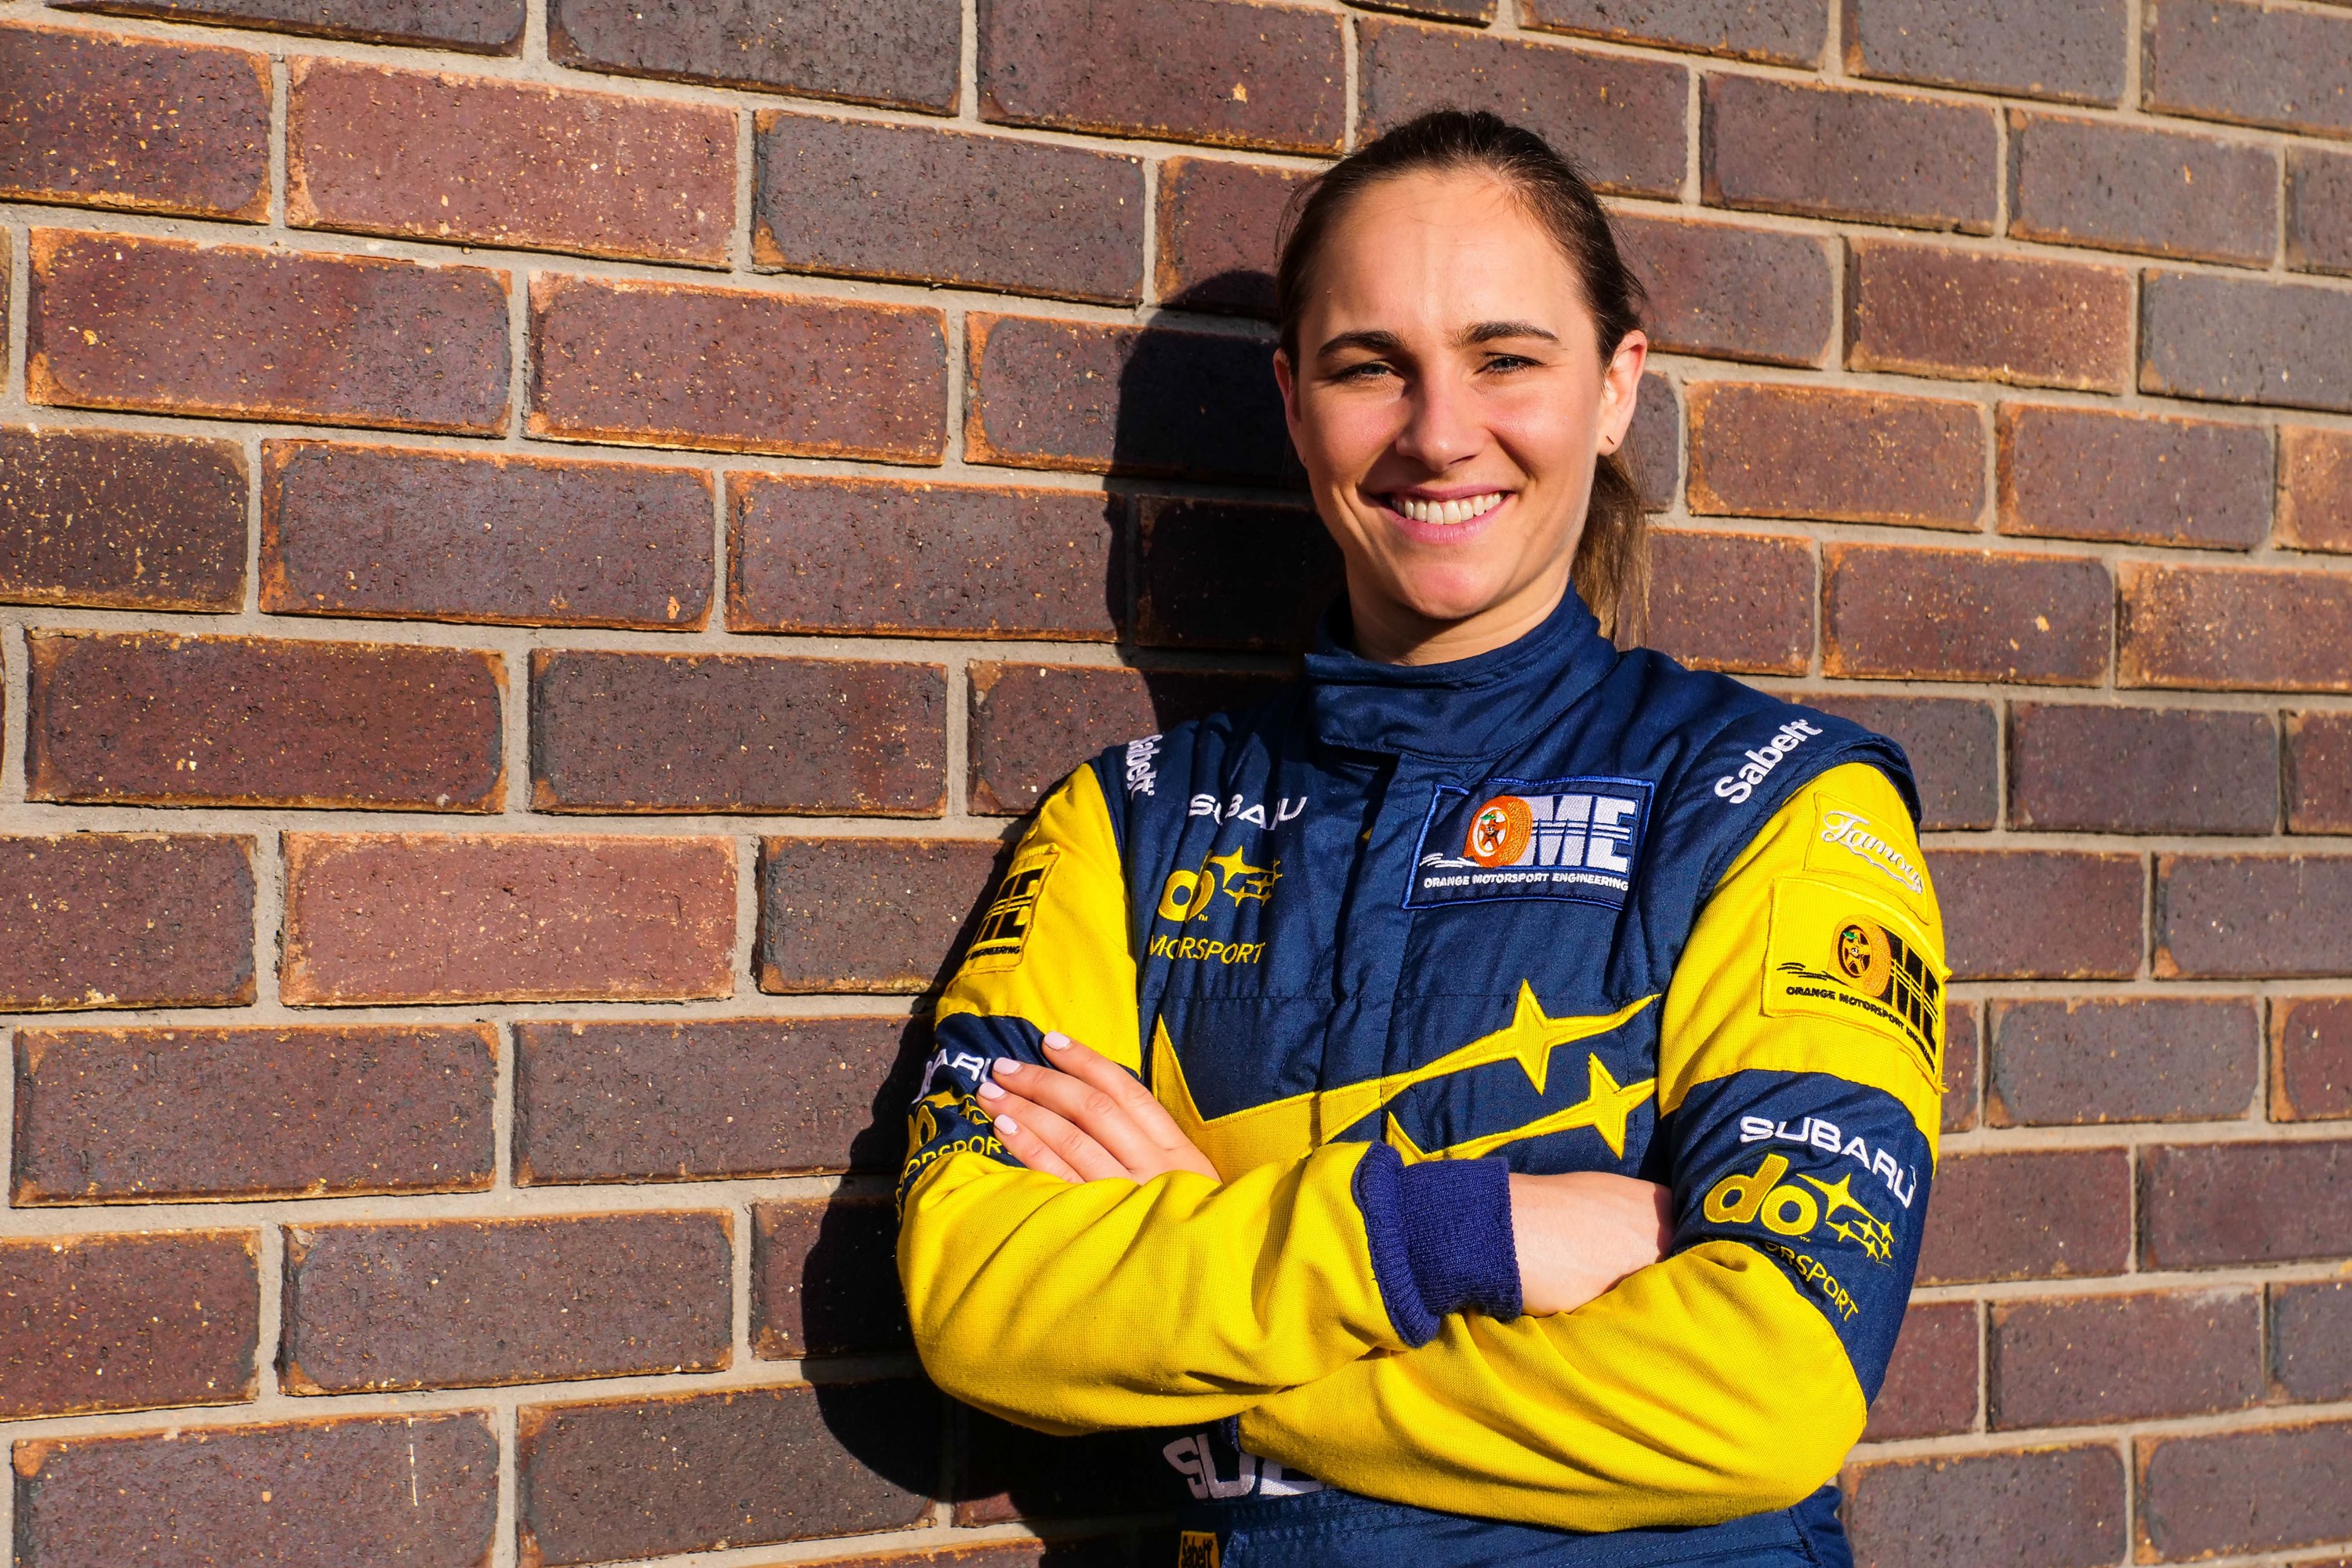 Molly Taylor, looking forward to 2019 with a  revised livery, a new motorsport provider and an all-new All-Wheel Drive WRX STI will give the factory-backed Subaru do Motorsport team added edge in the 2019 CAMS Australian Rally Championship (ARC).